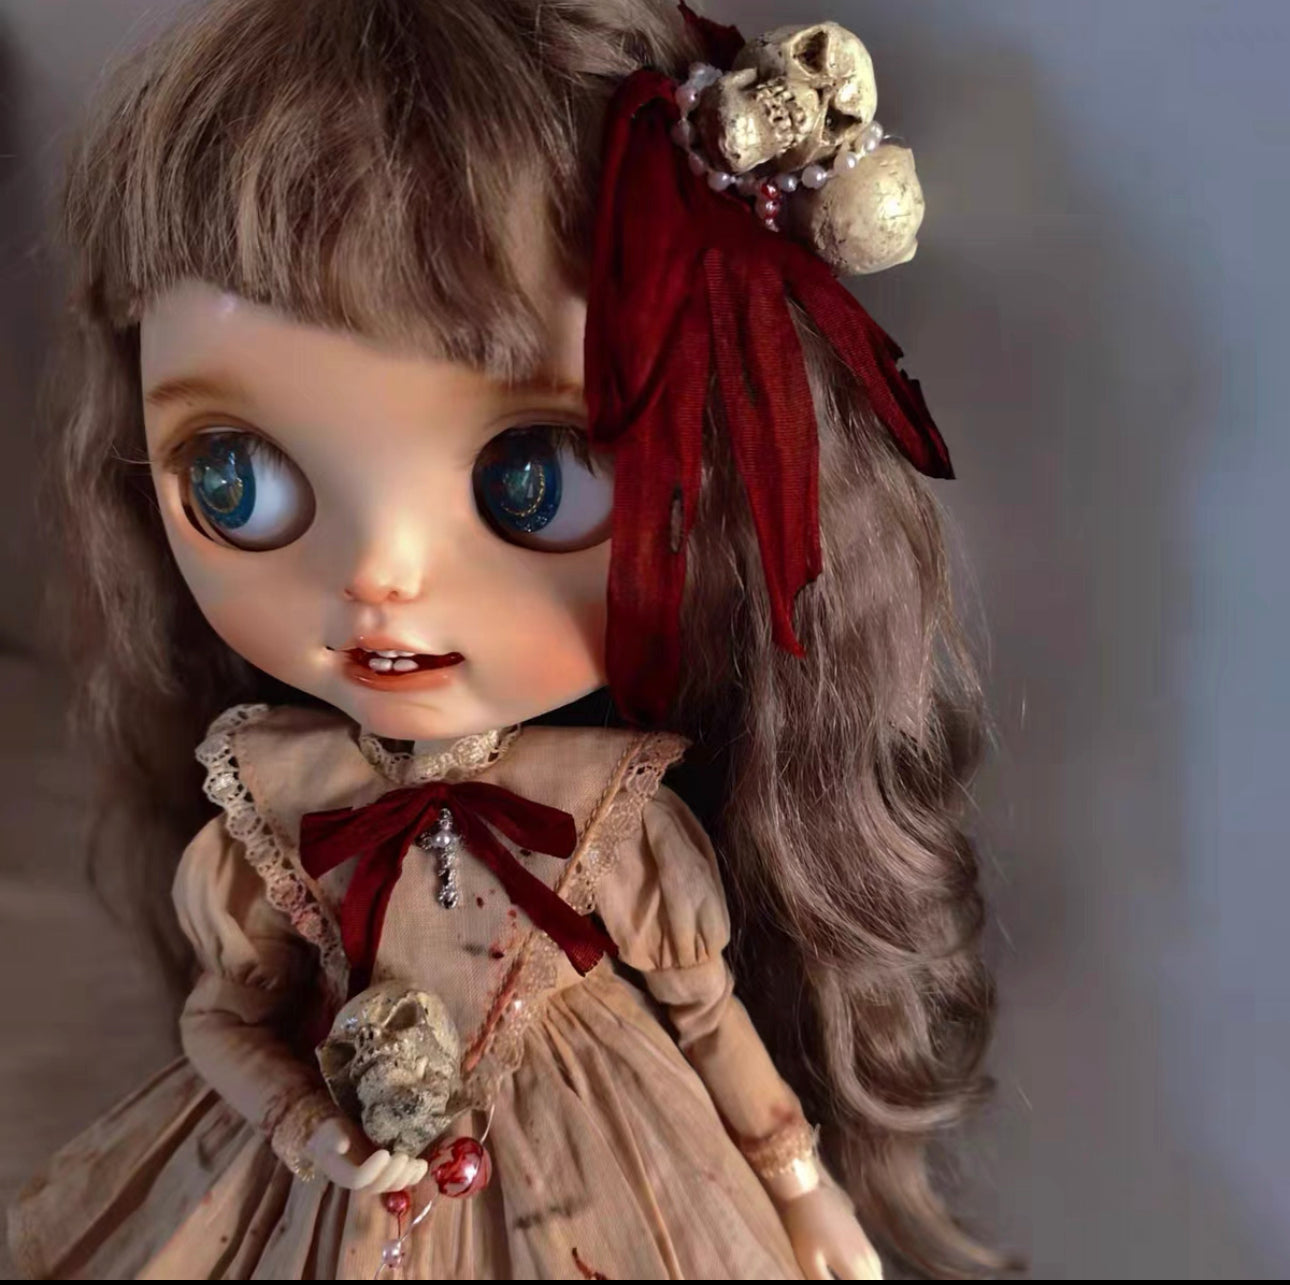 Halloween Blooded Long Dress Night Dress for Blythe,BJD 1/6 Doll Clothes Customized 03